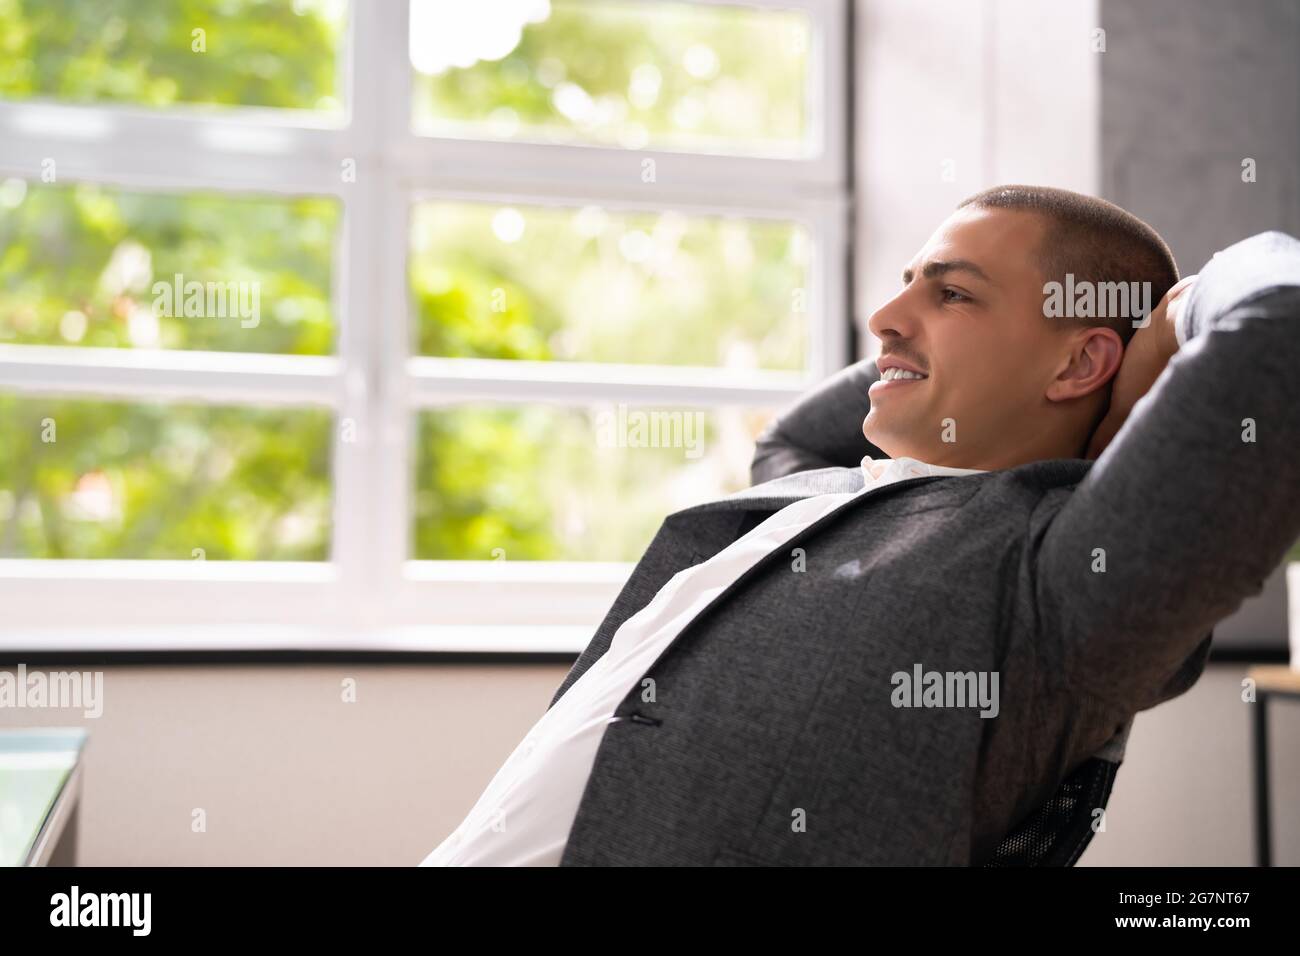 Open Office Window. Breathing Fresh Air And Relaxing Stock Photo